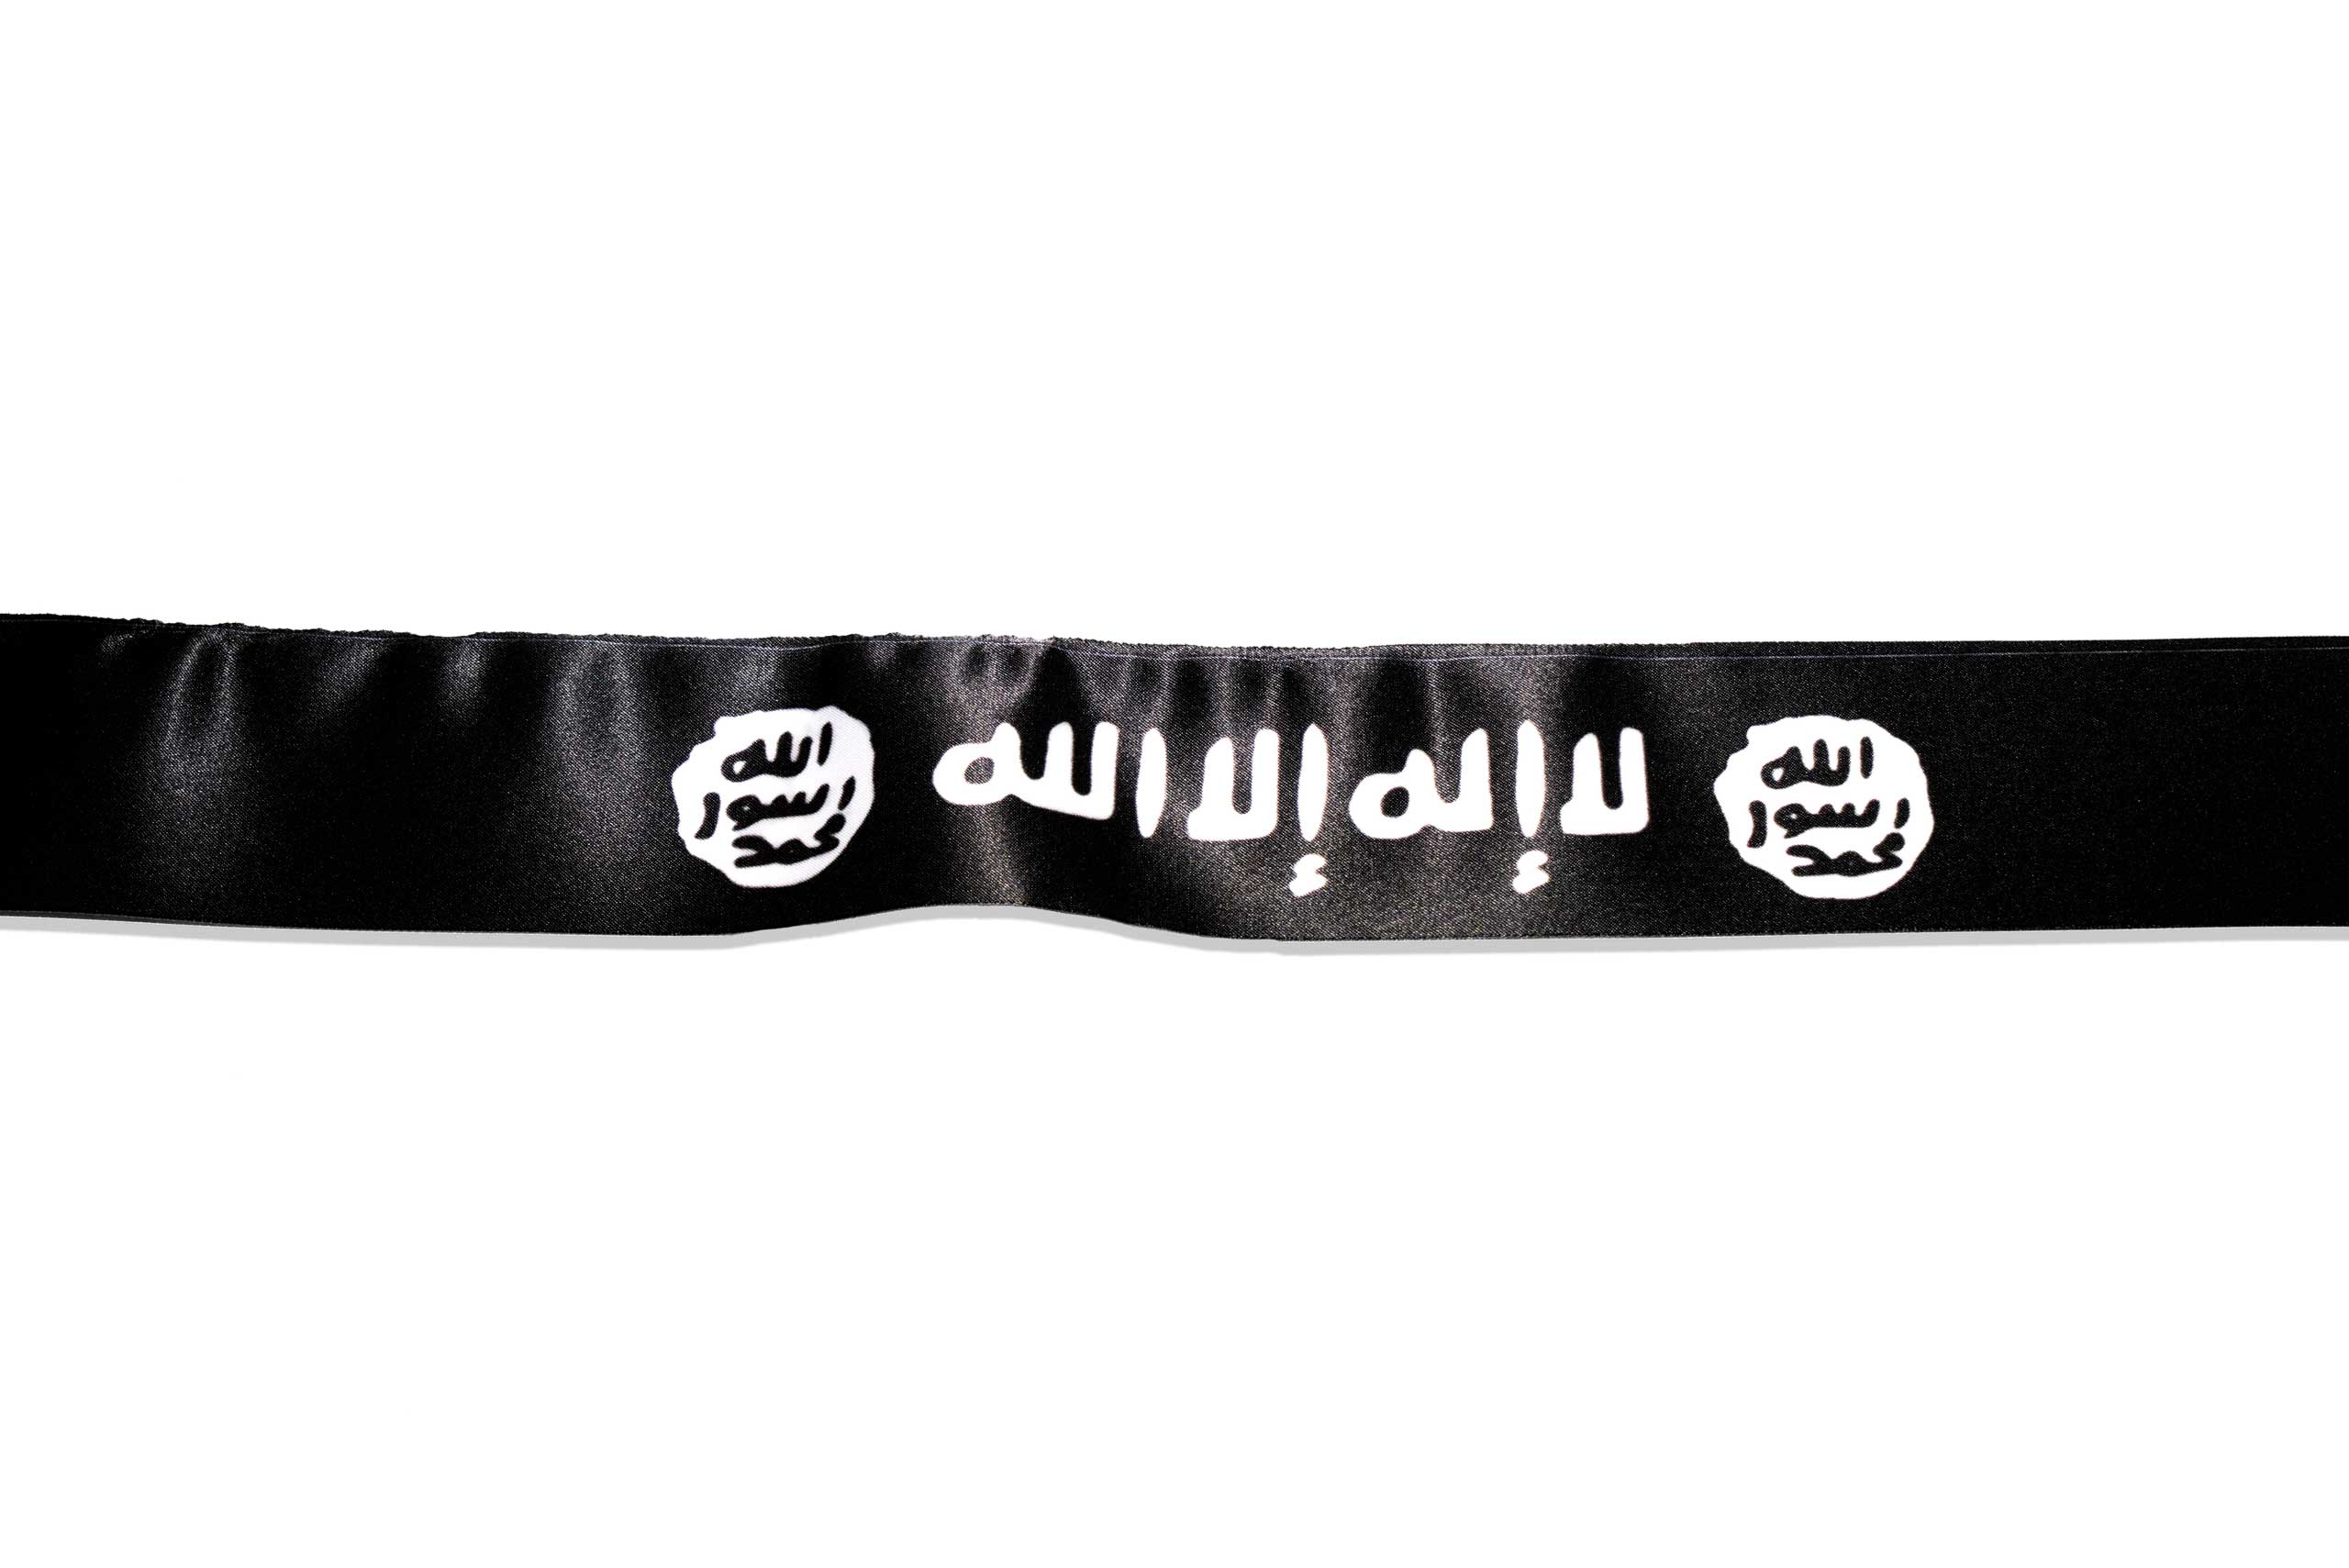 Head band featuring the islamic iconography of Jihad, found in a Islamic clothing and accessory shop in the Bagcilar district of Istanbul, Turkey.